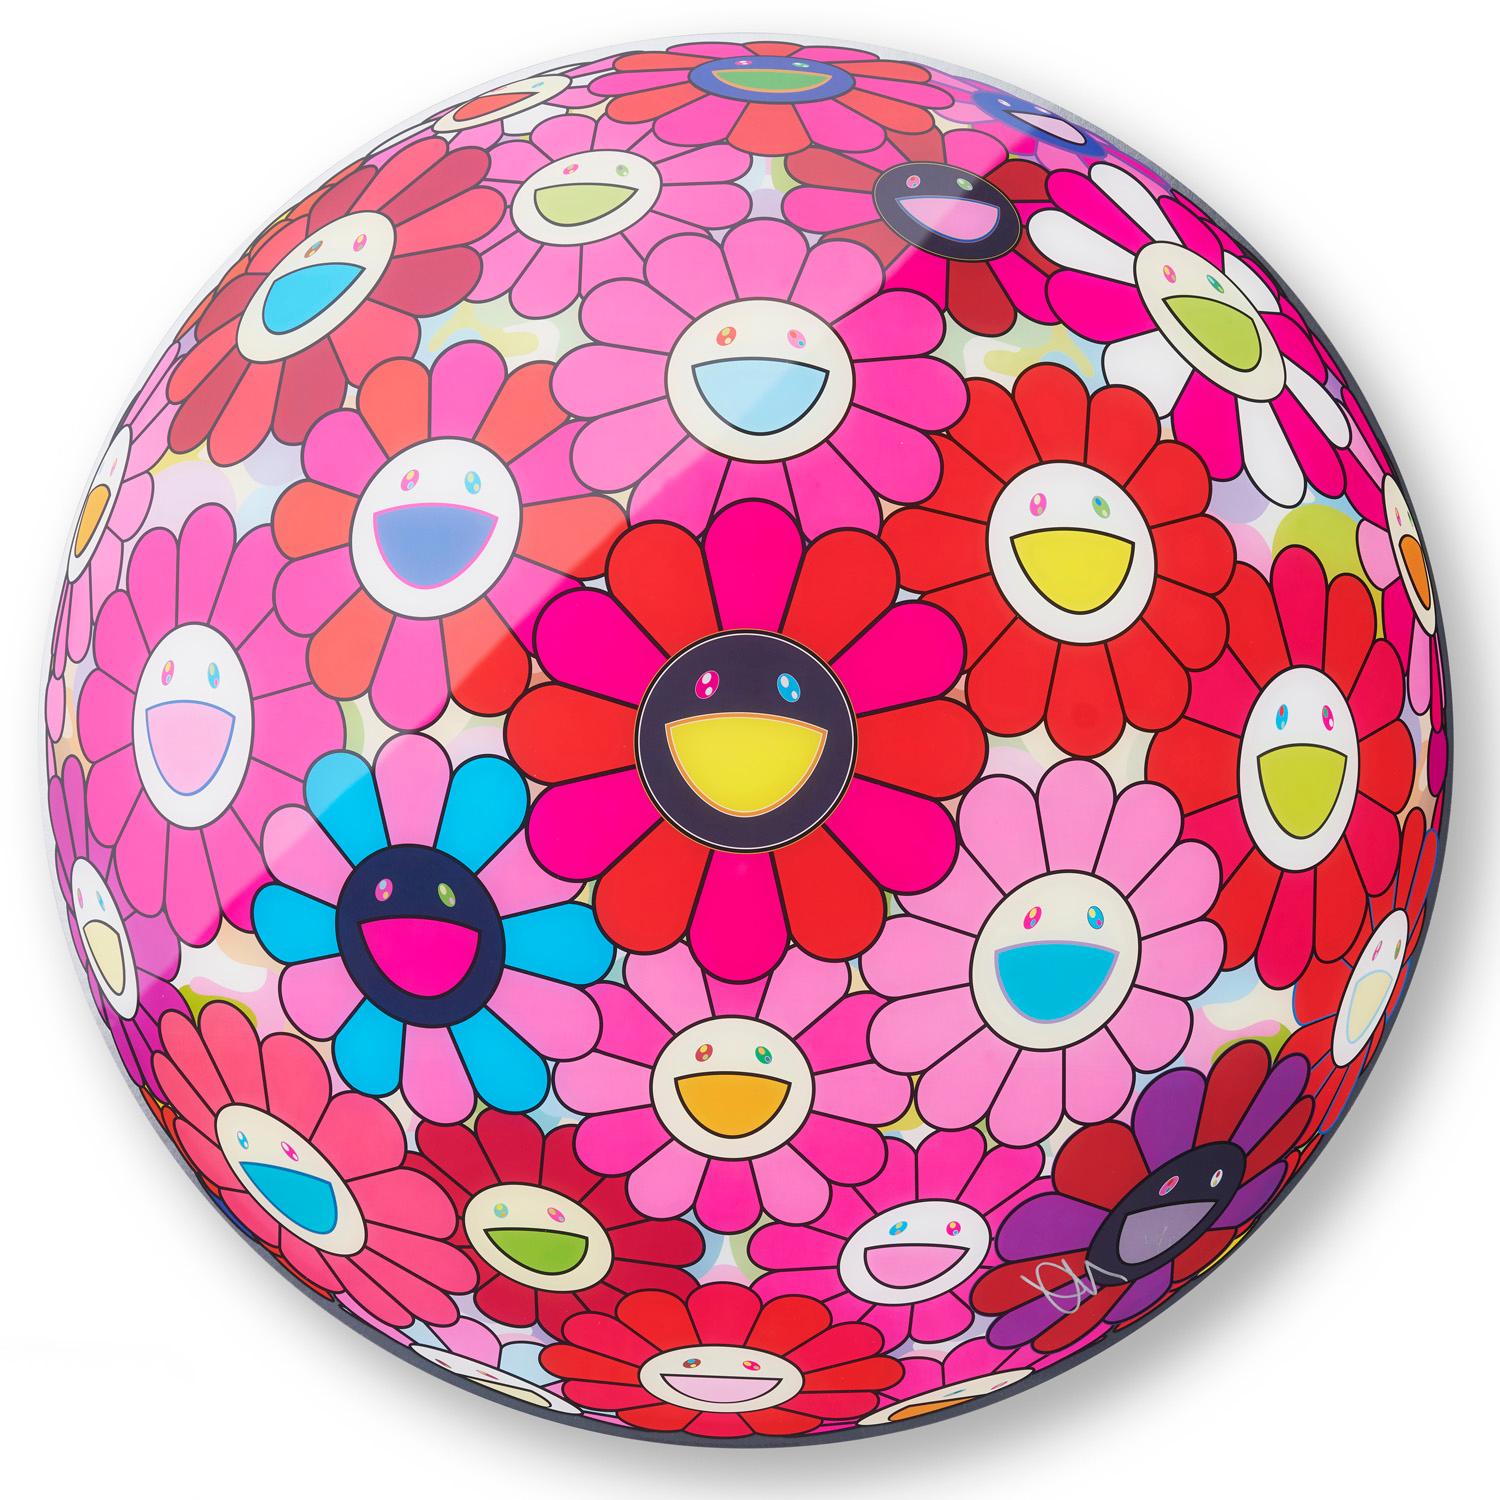 Takashi Murakami Figurative Print - Flower Ball 3D Thoughts on Picasso (“Paint it Red” project)